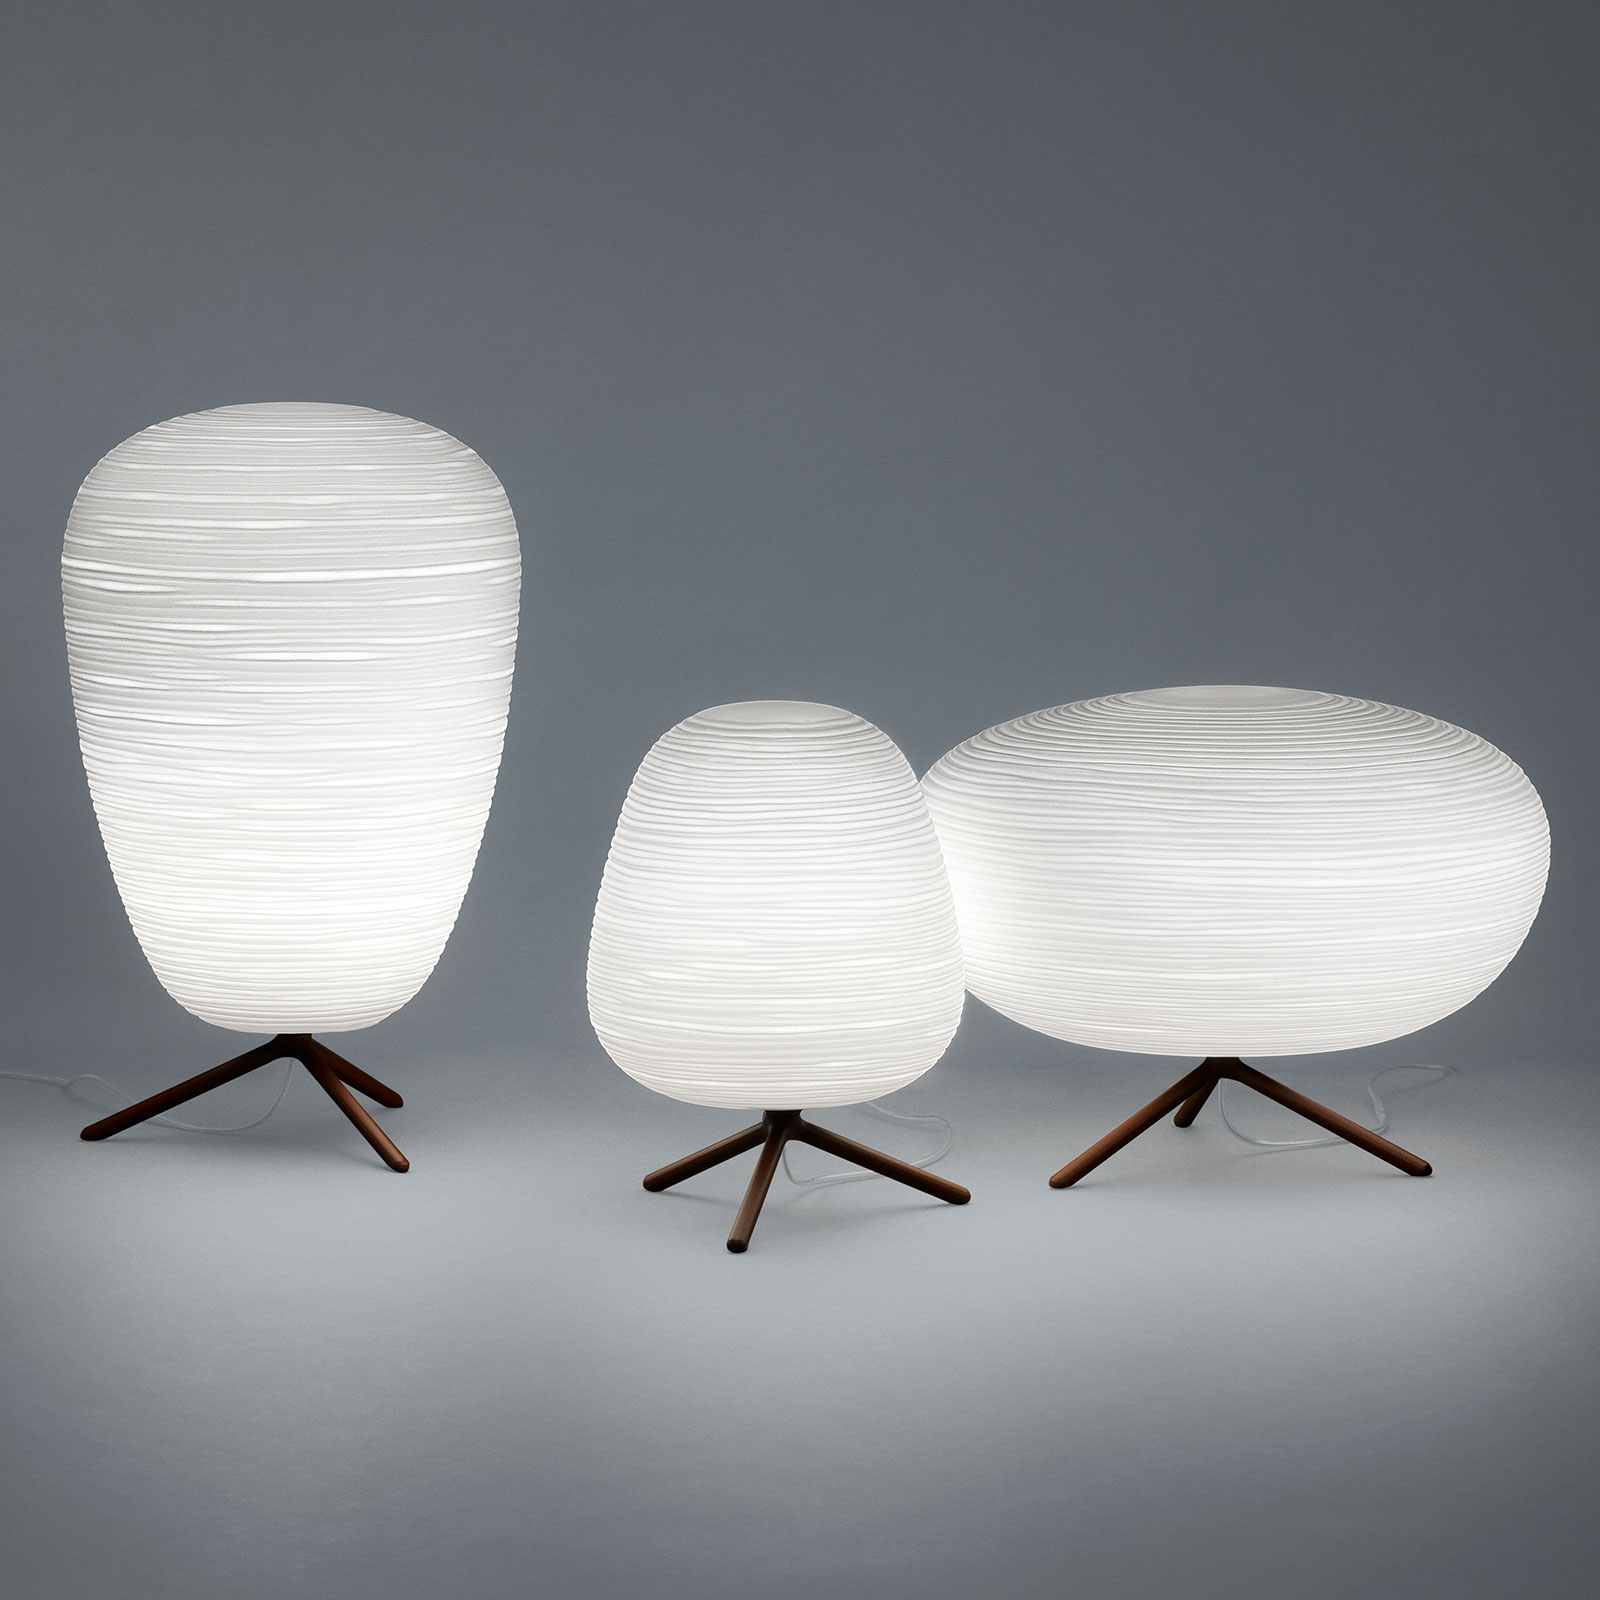 Foscarini Rituals 1 glass table lamp with dimmer